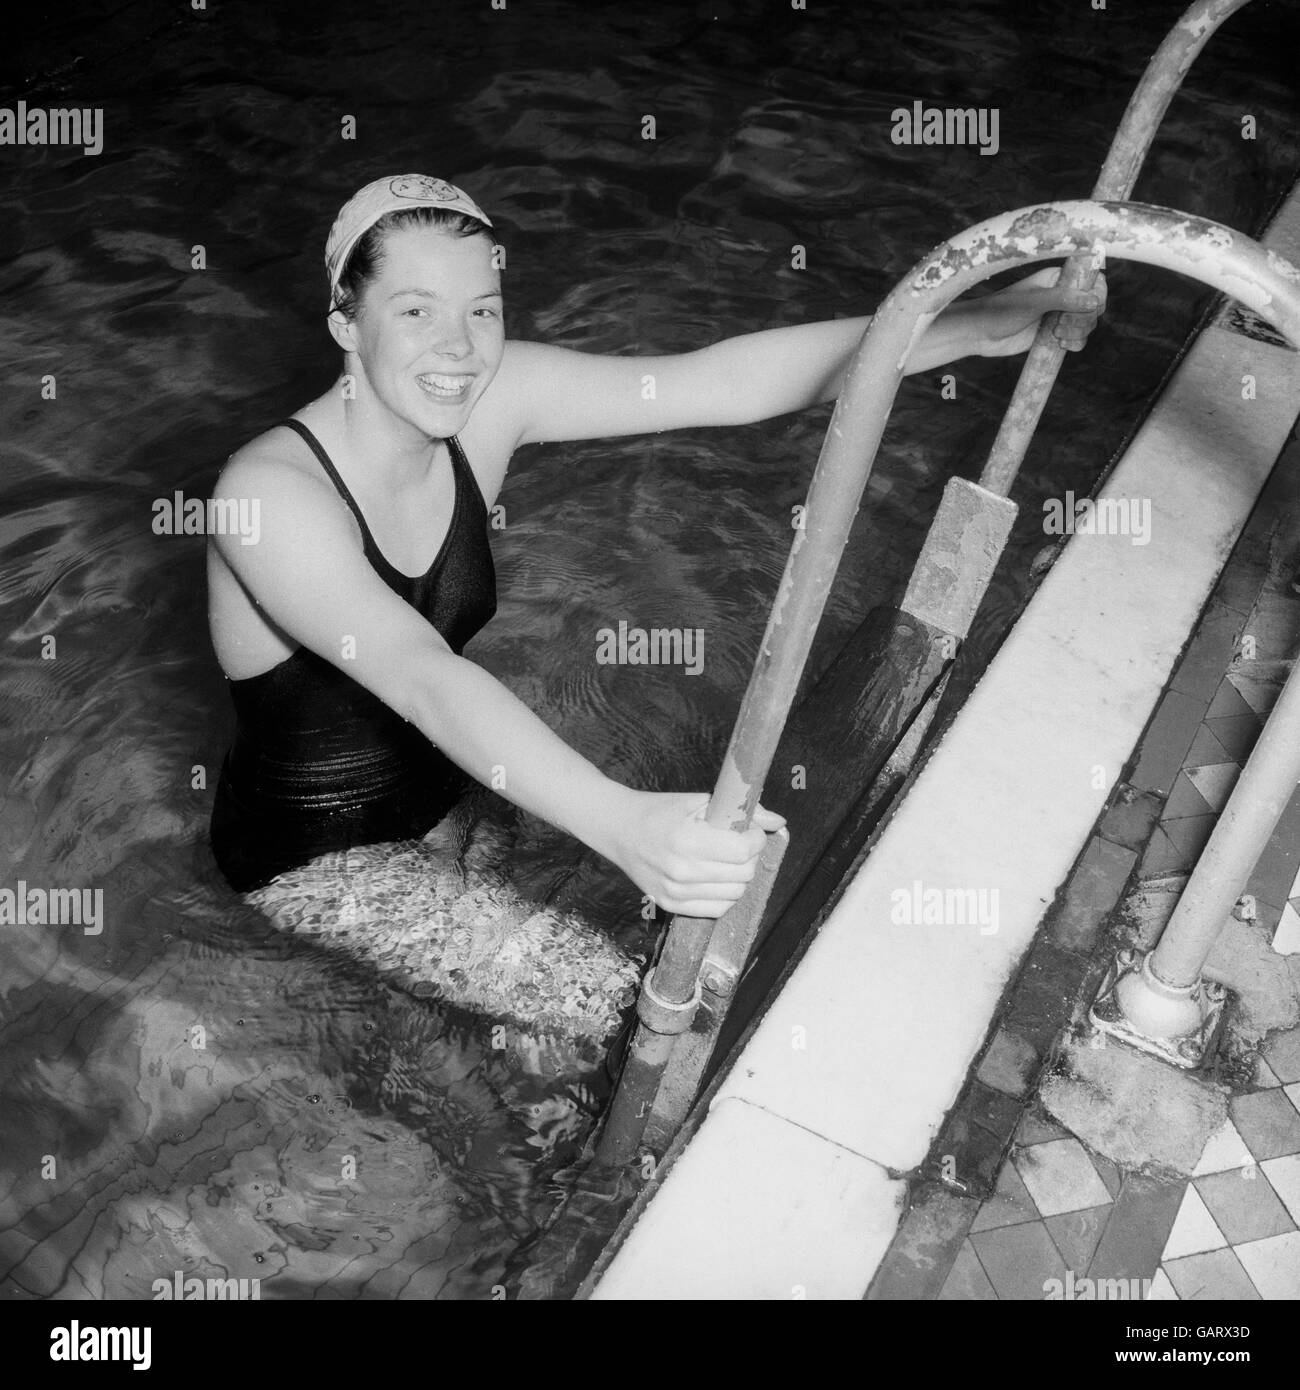 Olympic swimming pool Black and White Stock Photos & Images - Alamy